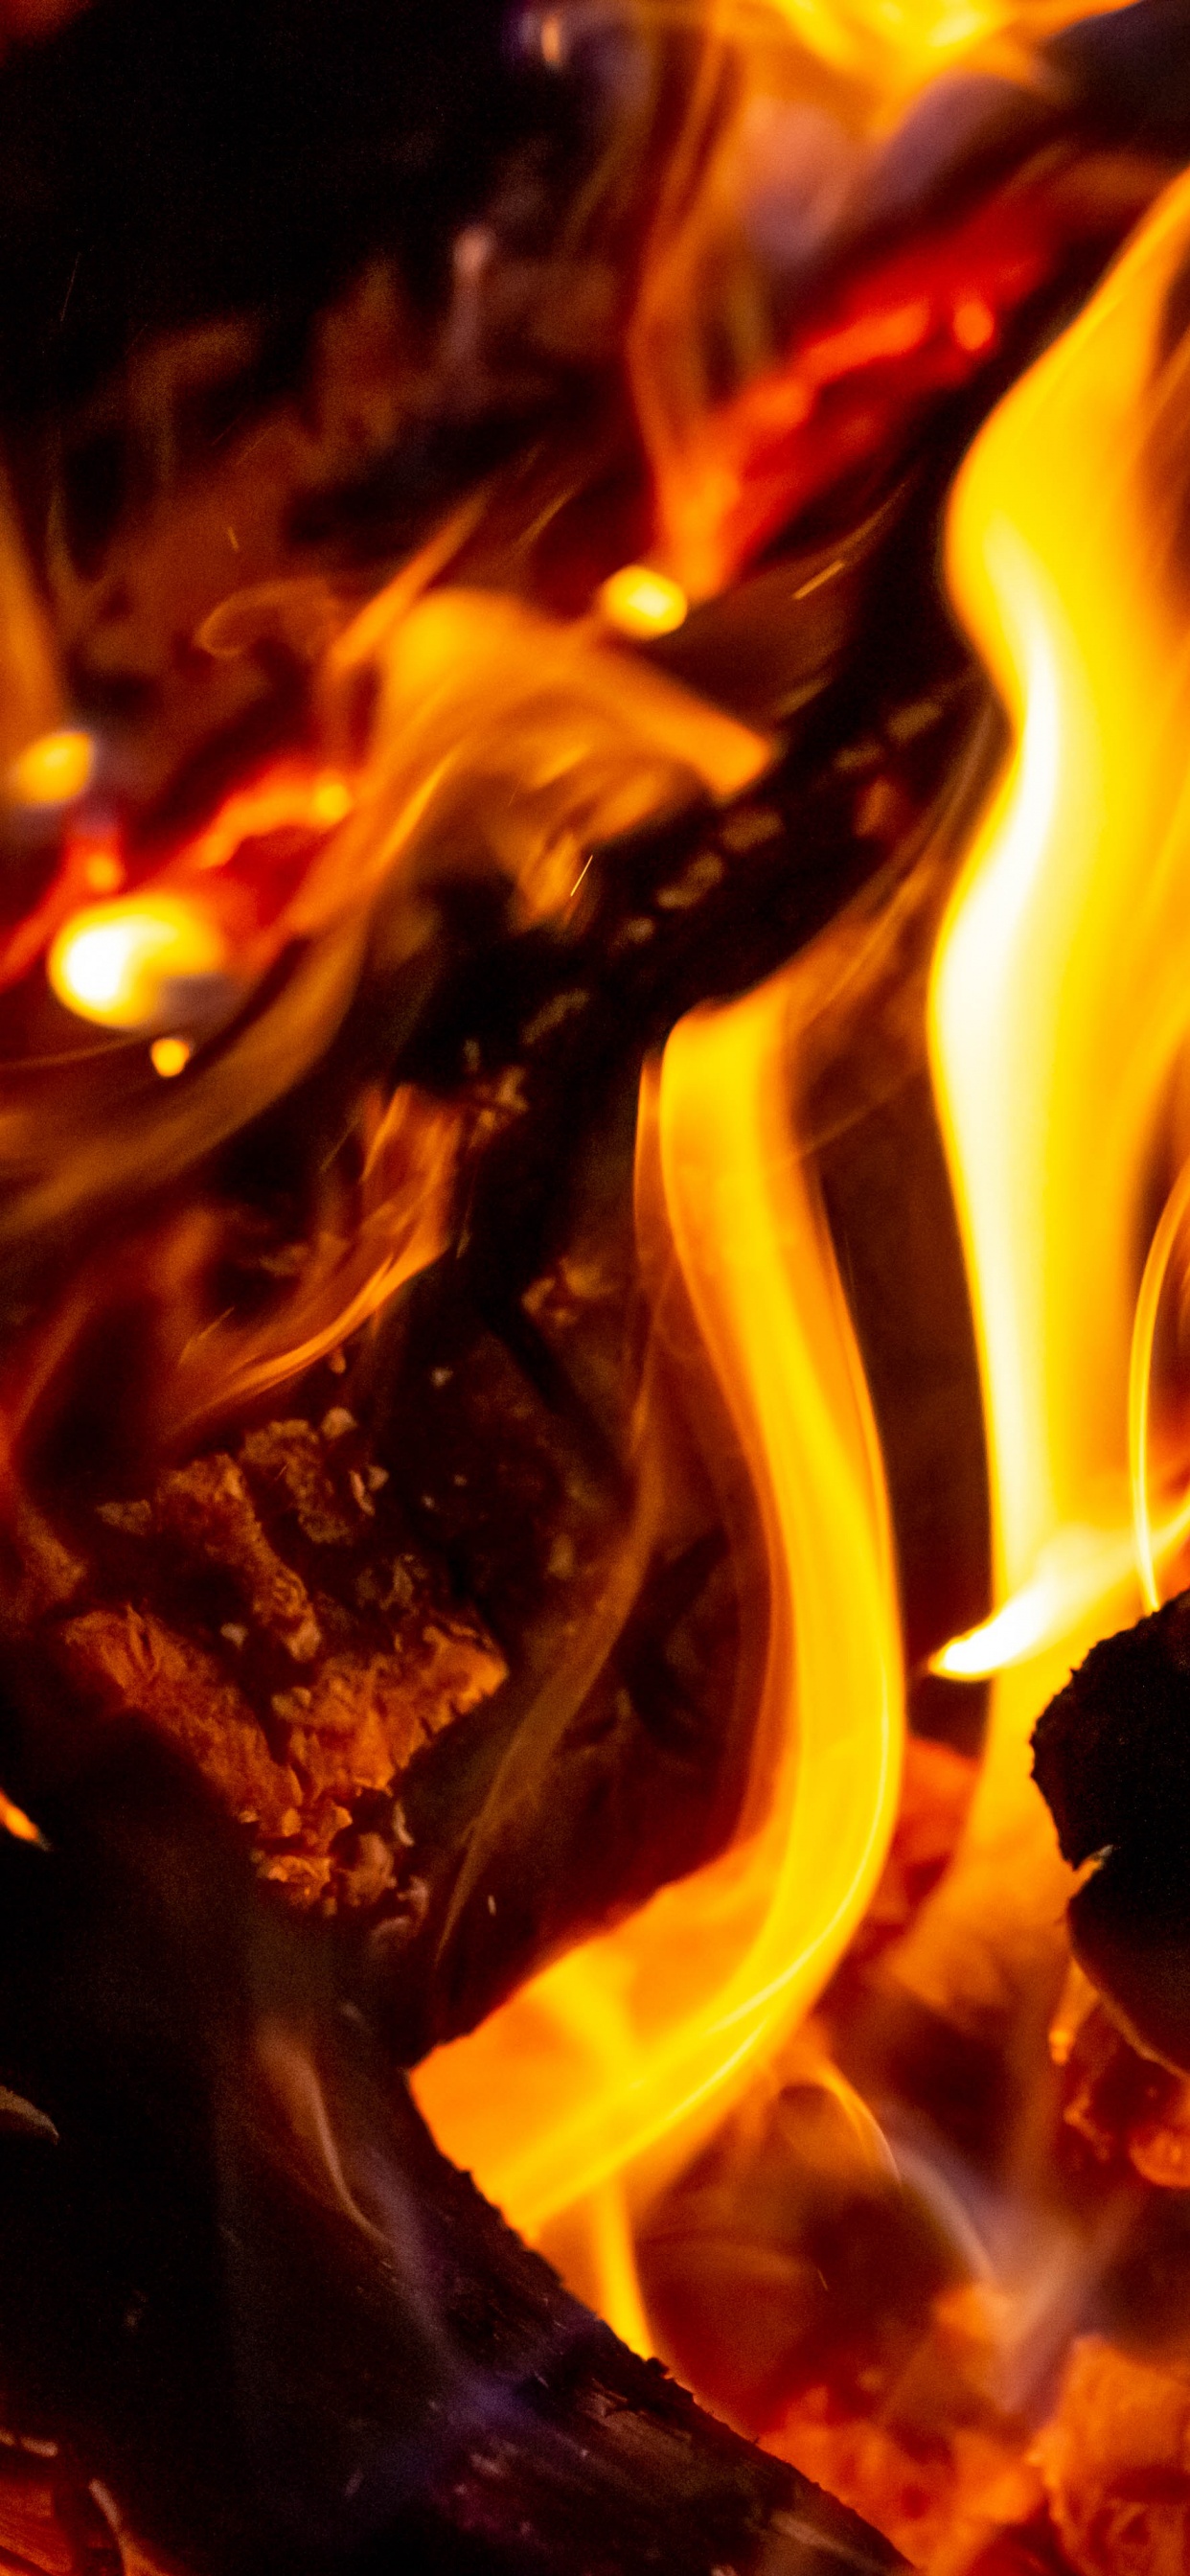 Orange and Black Fire in Close up Photography. Wallpaper in 1242x2688 Resolution